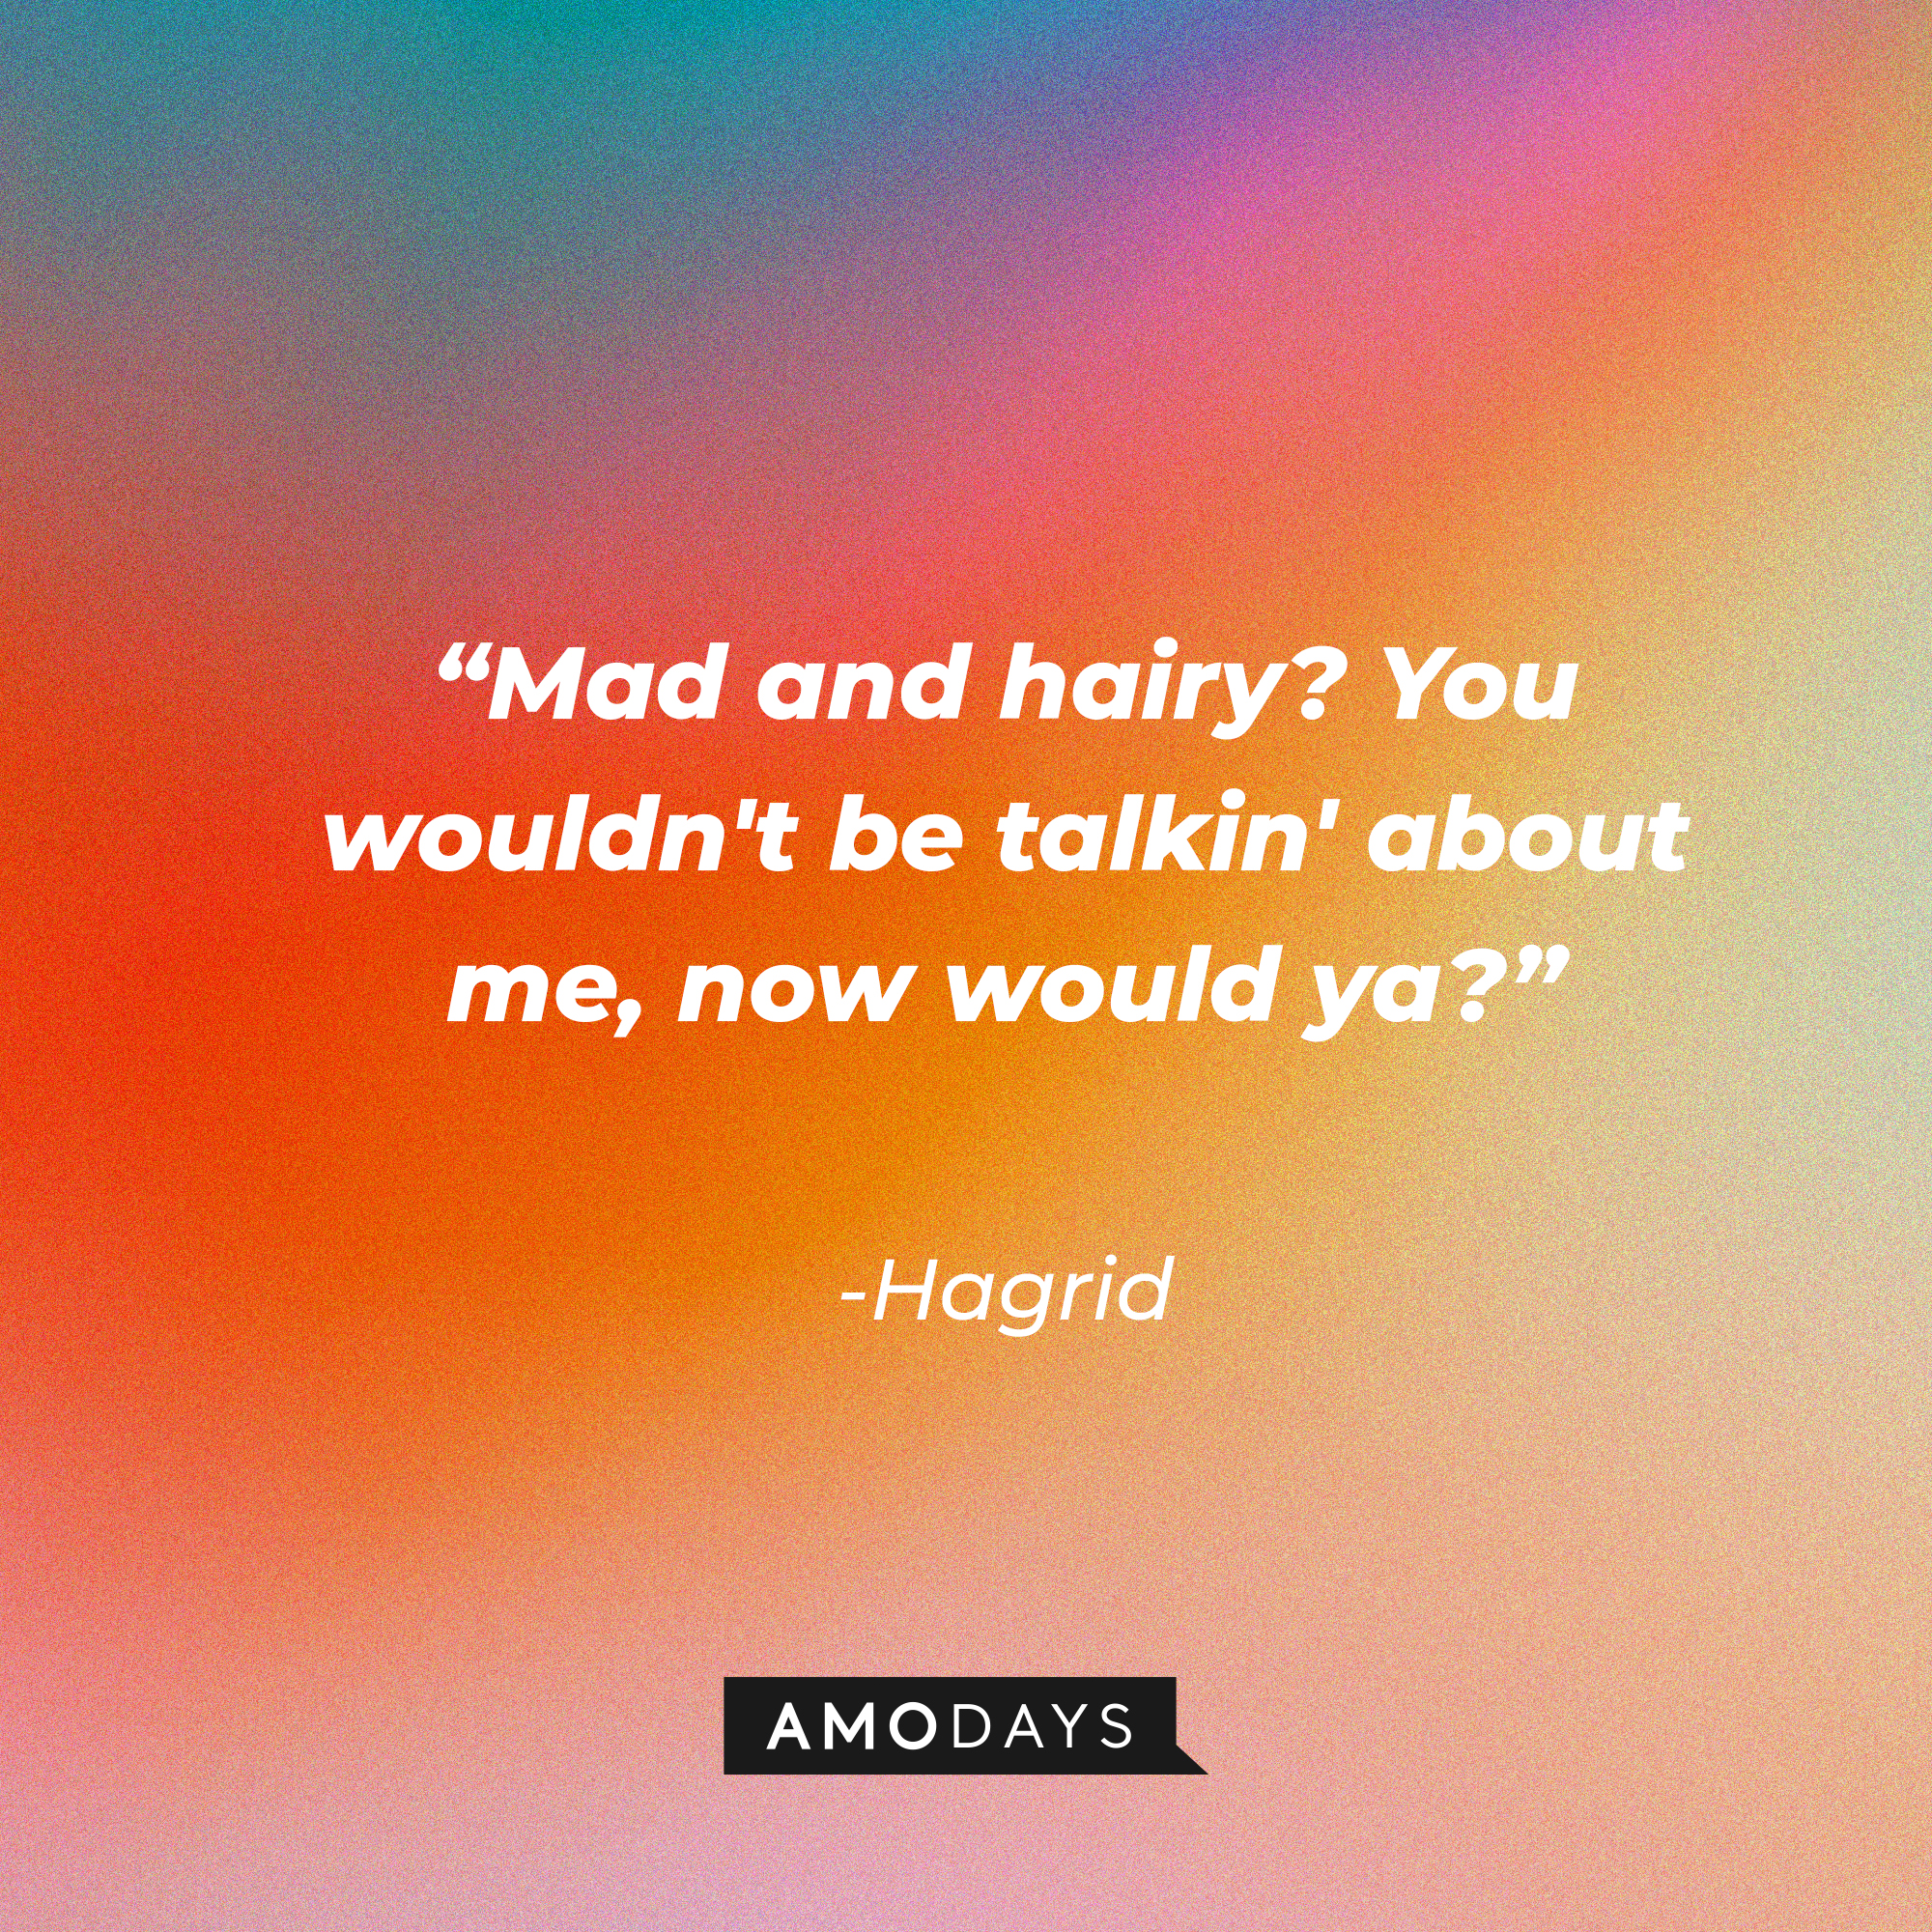 Hagrid's quote: "Mad and hairy? You wouldn't be talkin' about me, now would ya?" | Source: AmoDays